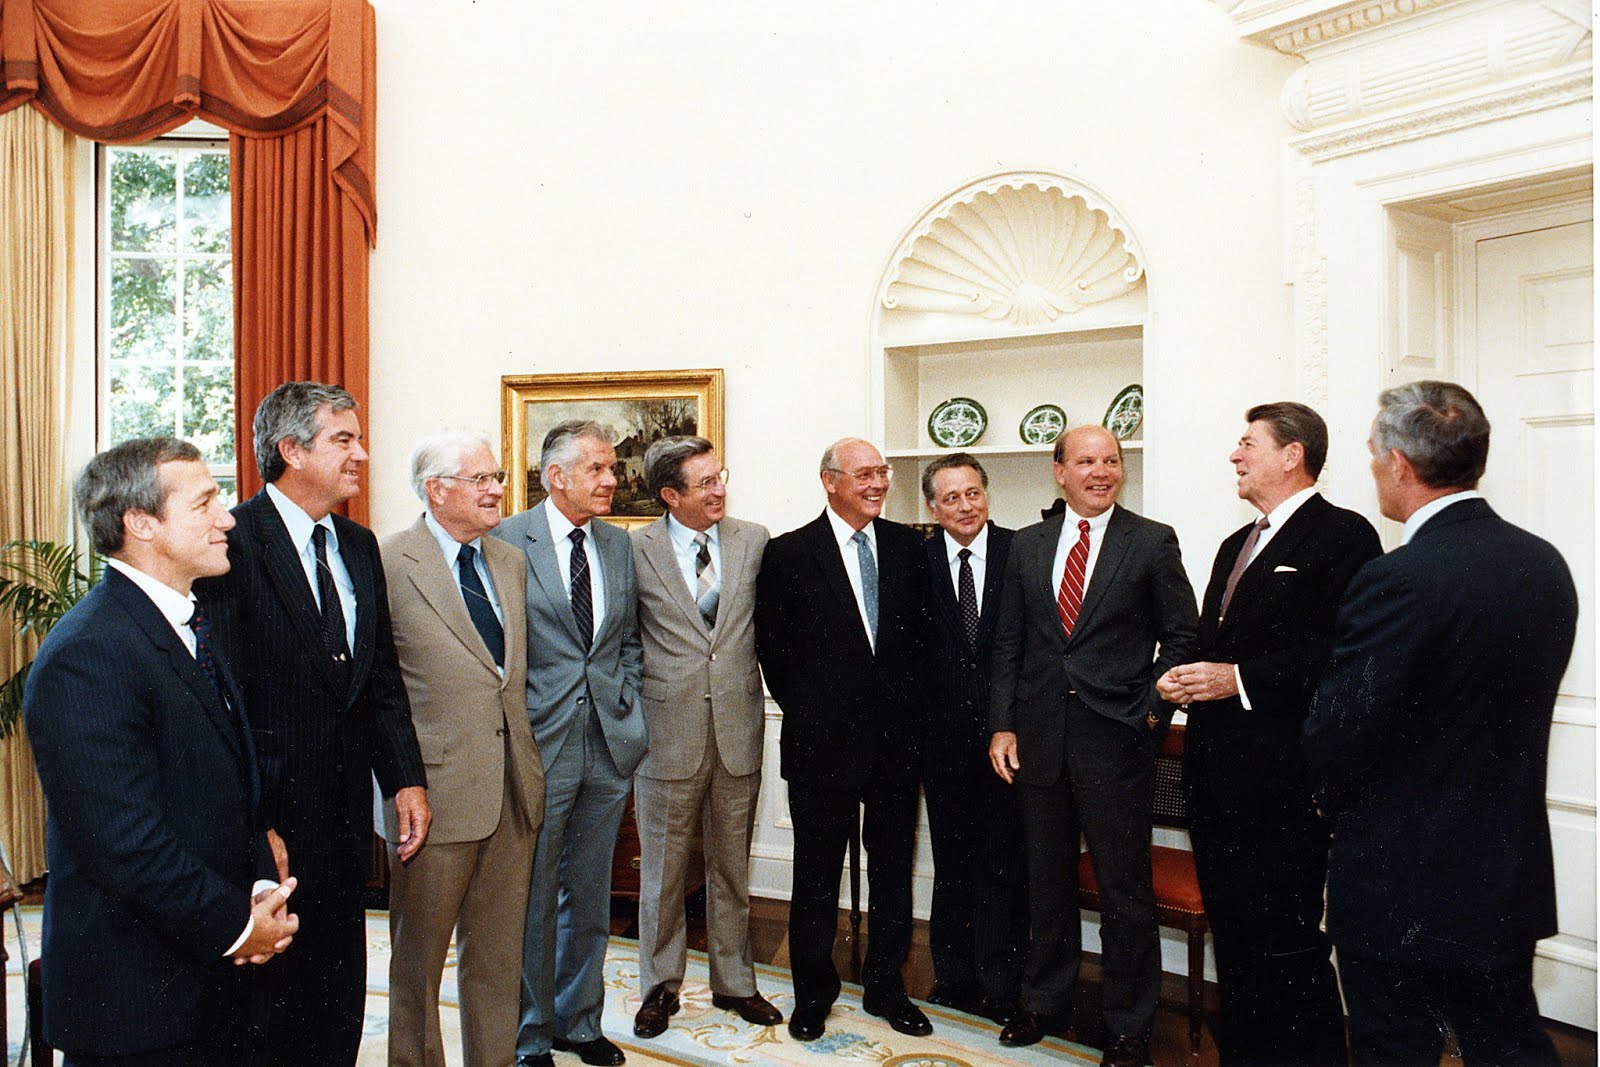 7/7/83: President Reagan meets with all the living Special Agent in Charges of the Secret Service